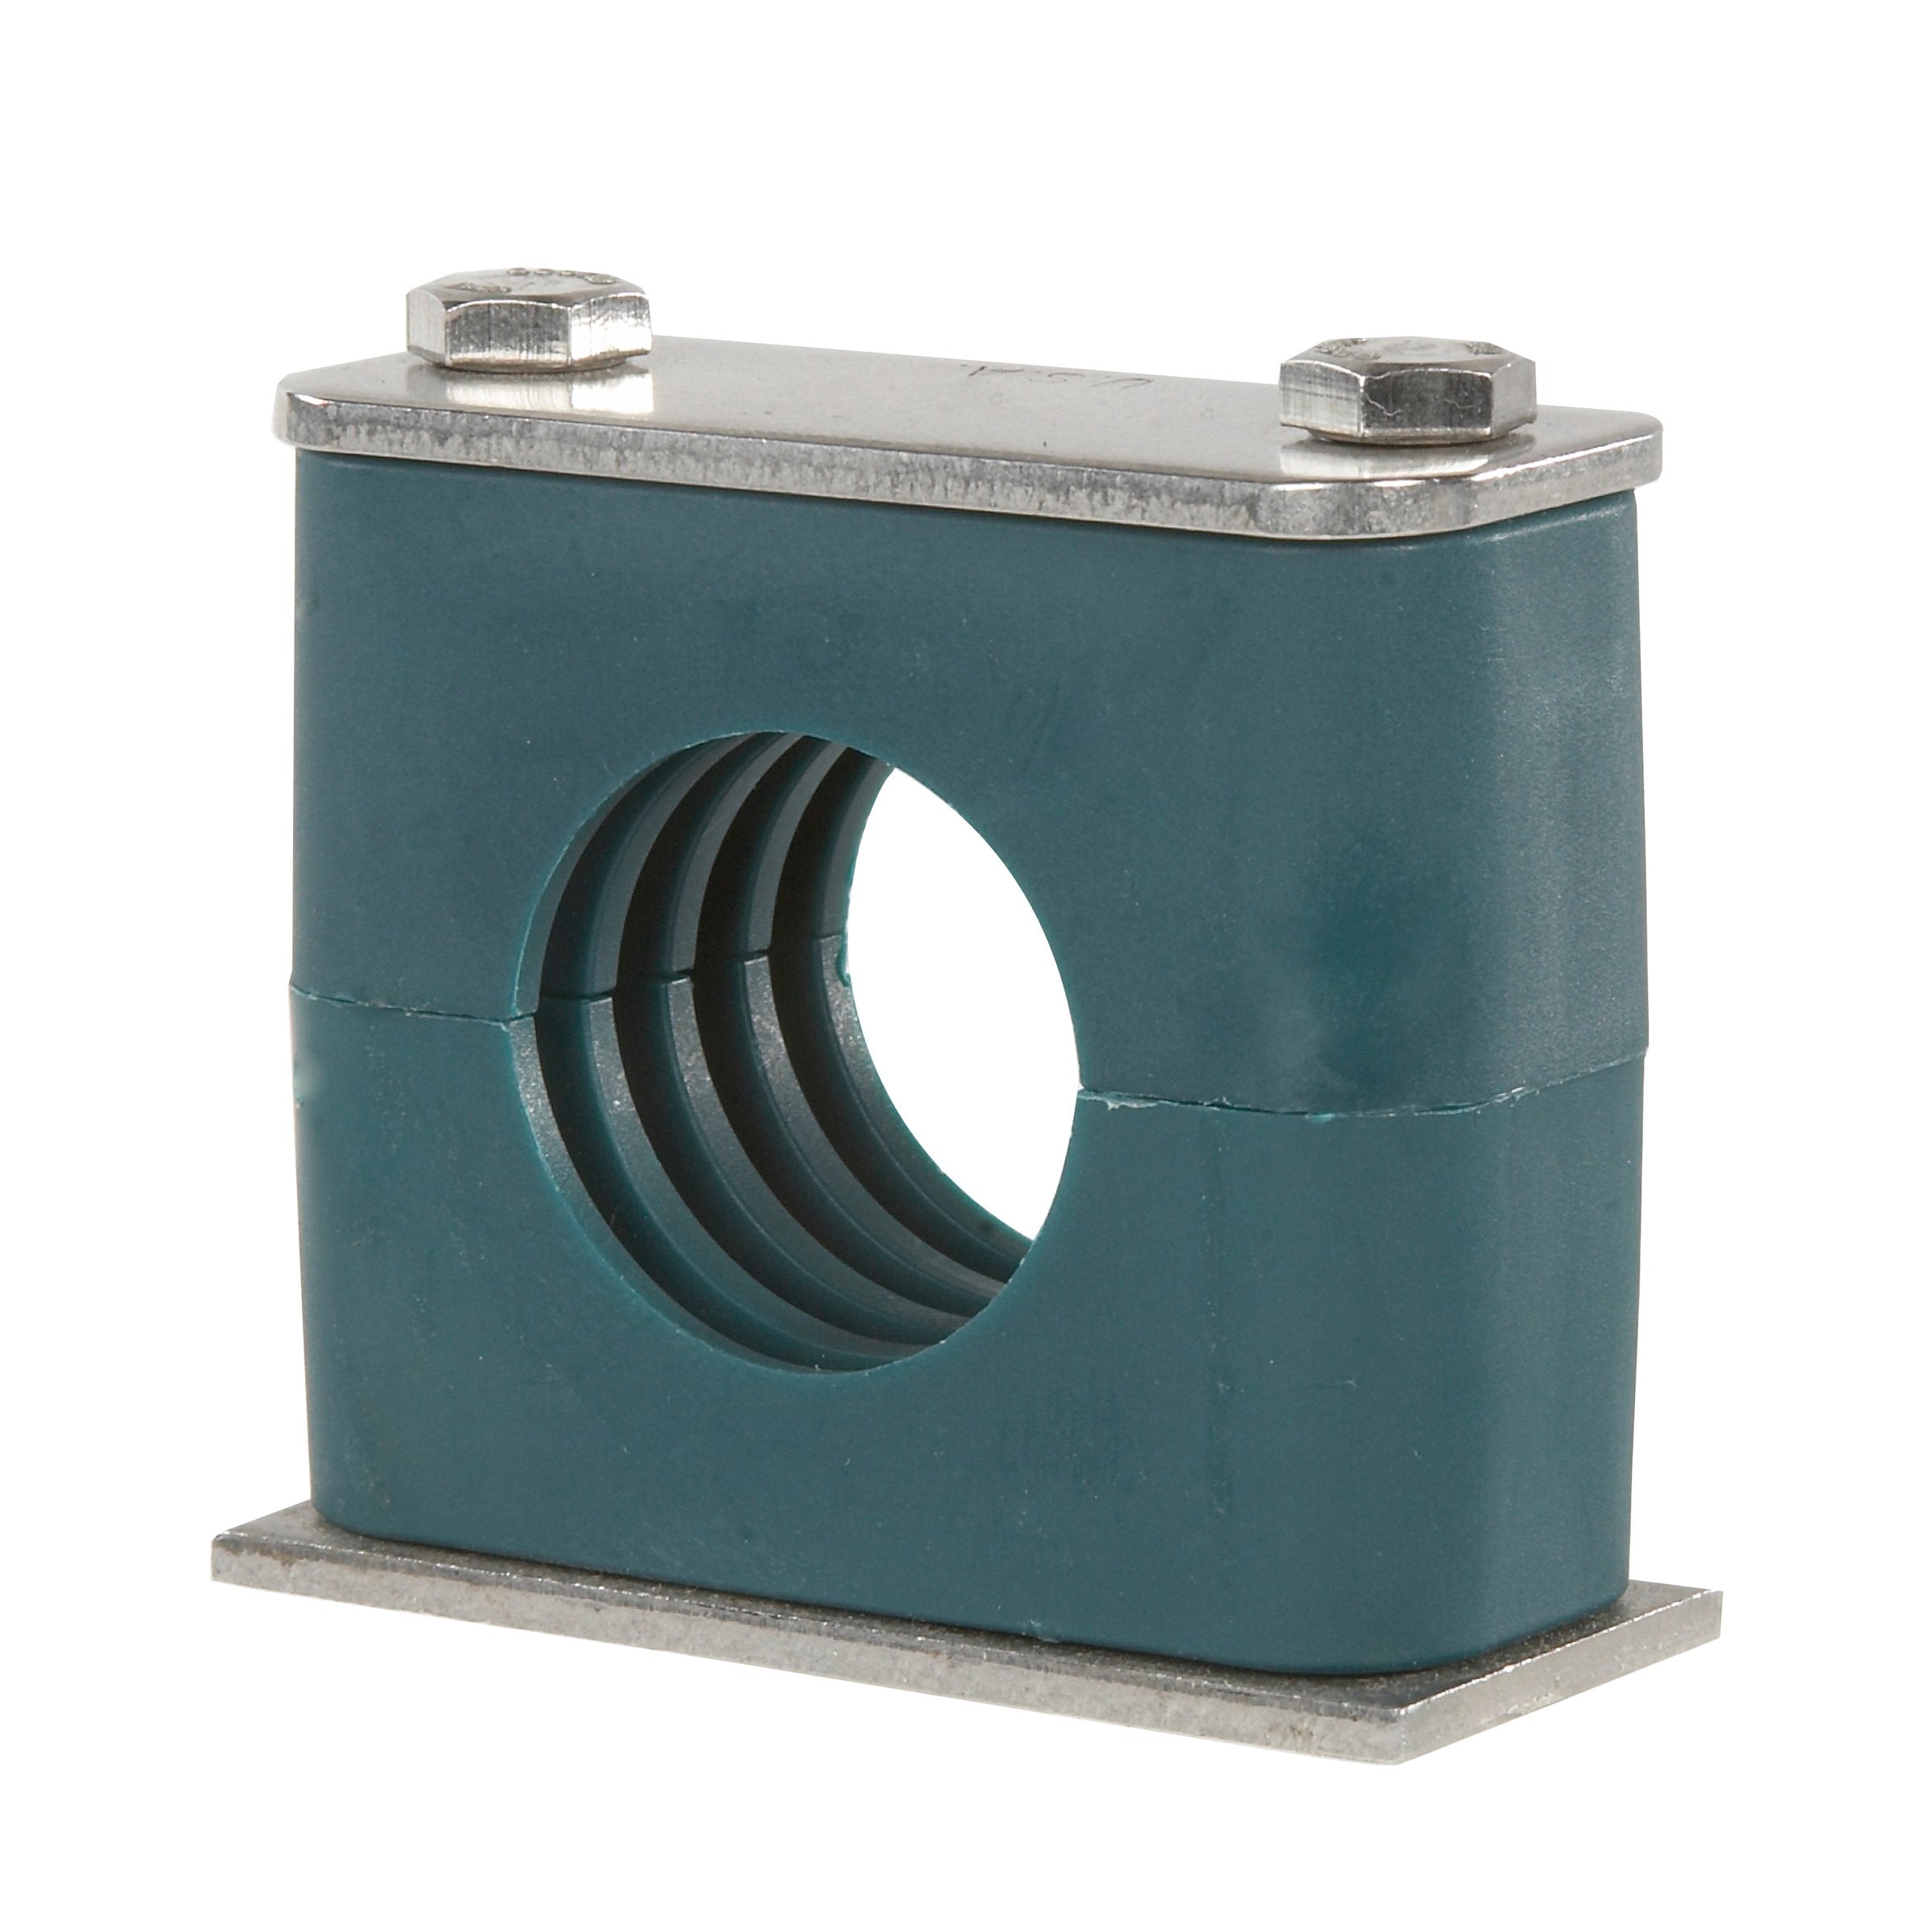 SP-110A-PP-DP-AS-U-W10 : Stauff Clamp, Single Weld Plate, 0.394" (10mm) OD, for 1/8" Pipe, Green PP Insert, Profiled Interior, Carbon Steel